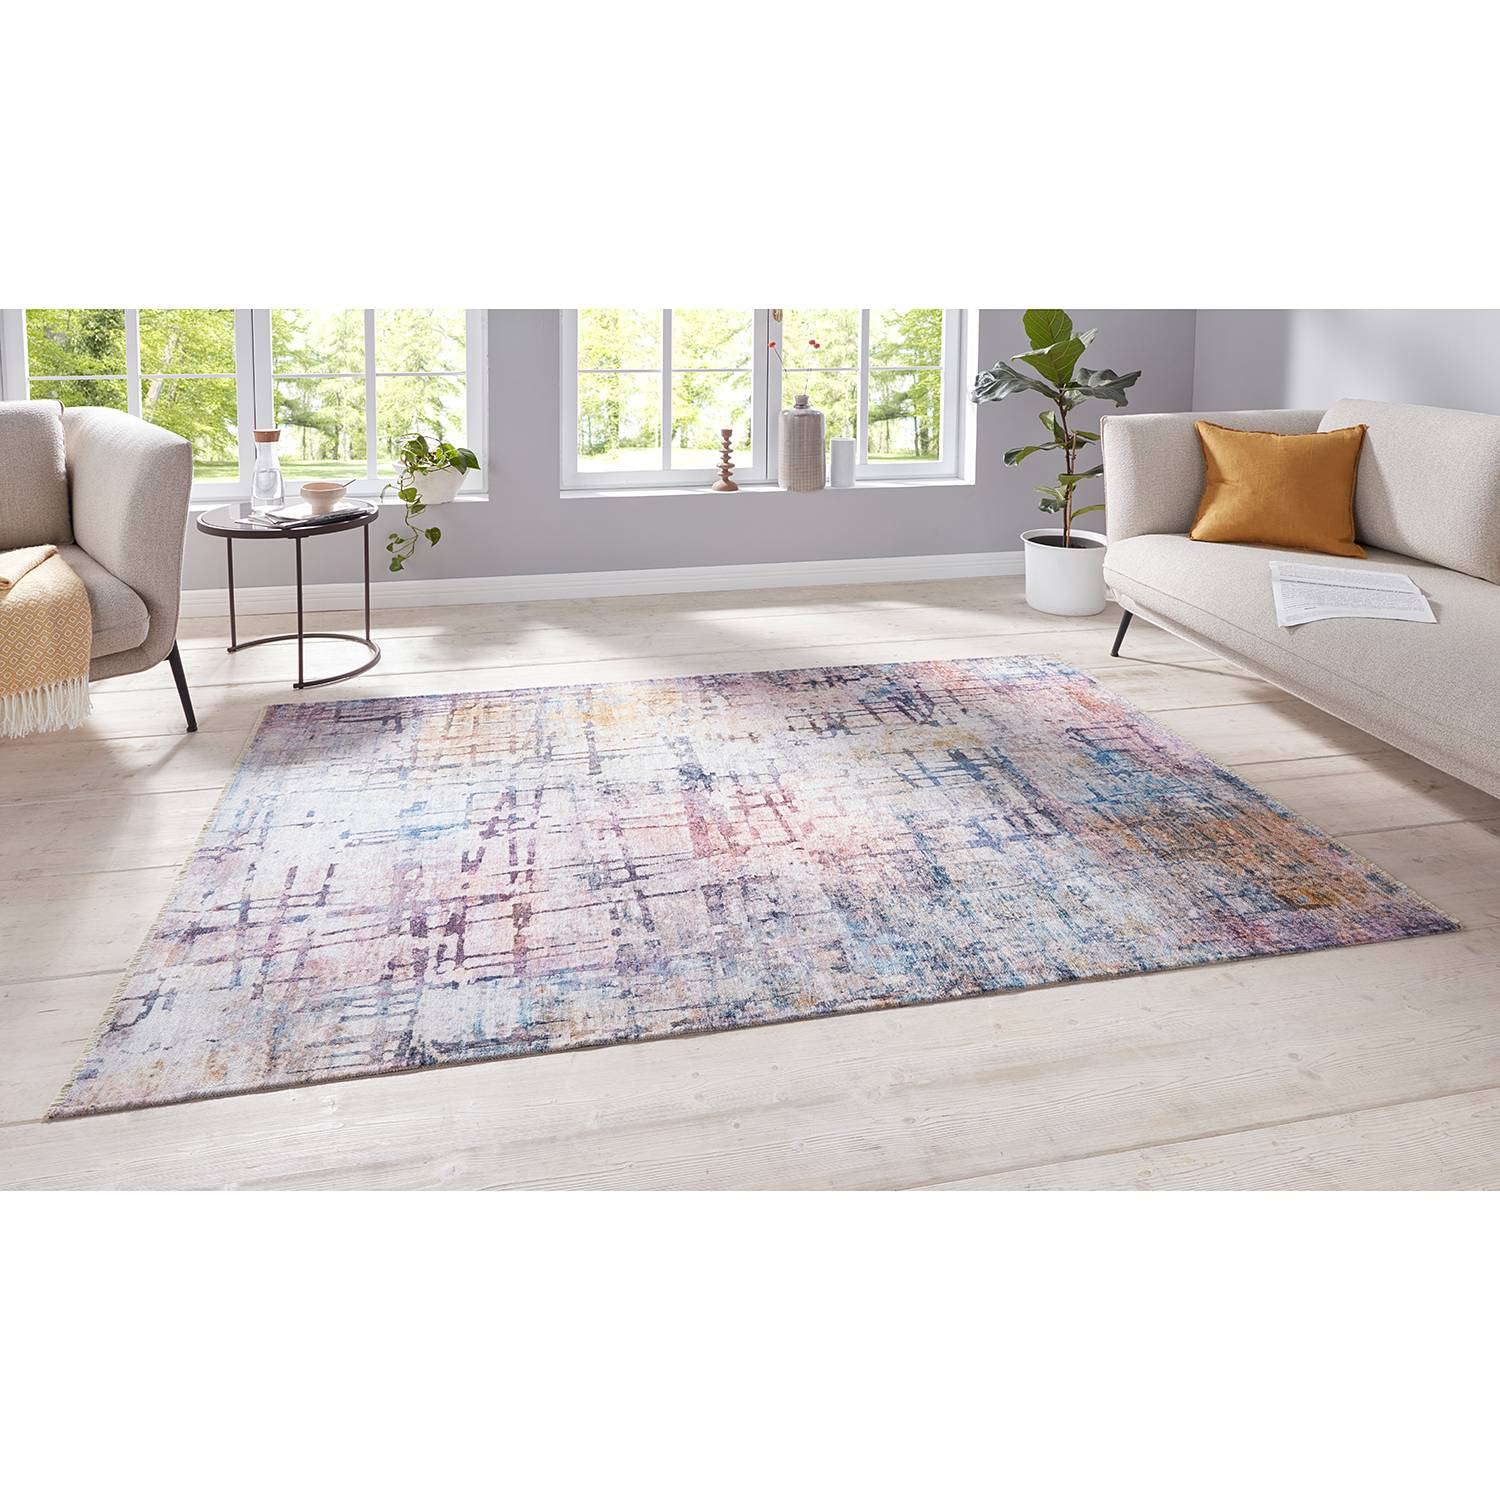 Image of Tapis Contemporary Pastel 000000001000243654